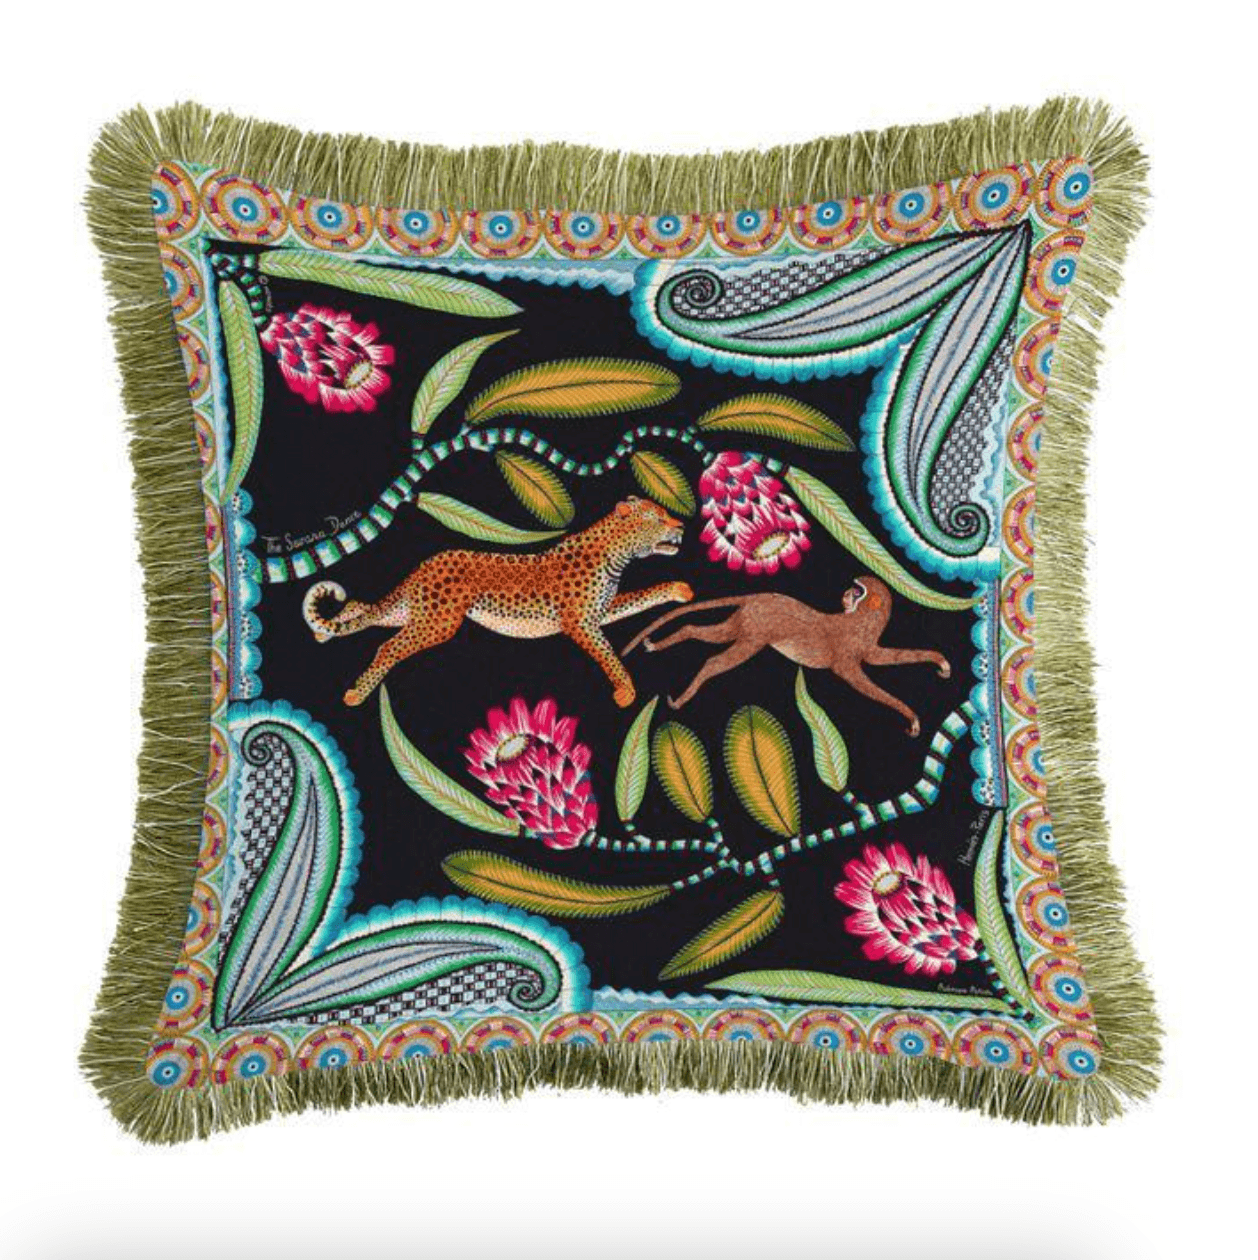 Leopard and Monkey Velvet Throw Pillow Cover with Fringes - MAIA HOMES